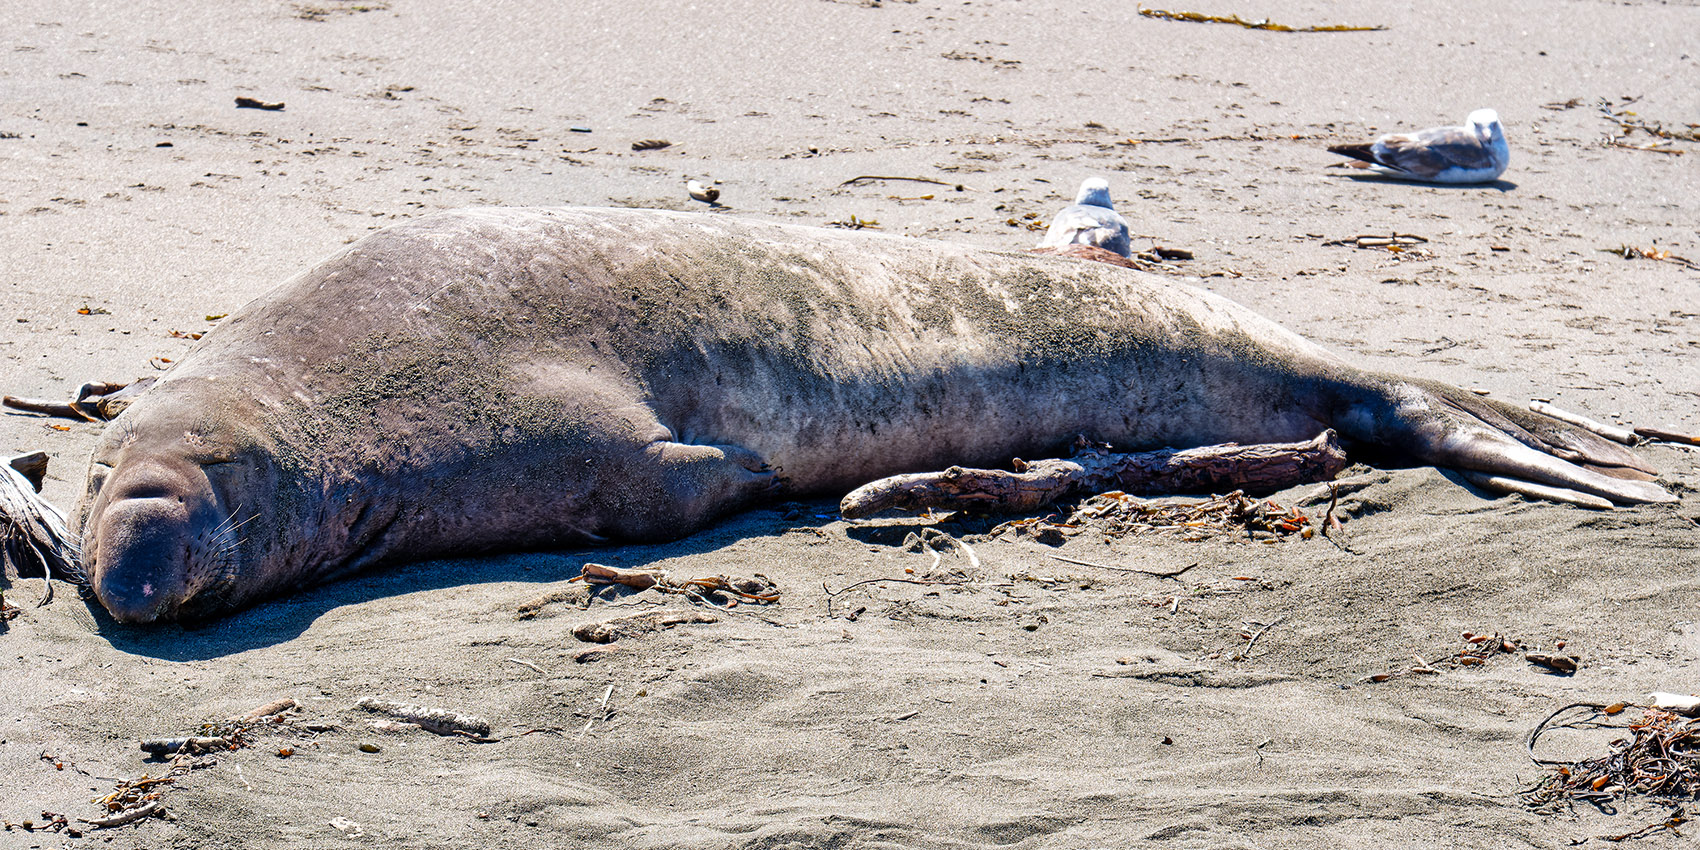 Adult male elephant seals reach up to 20 feet (6 meters) in length and weigh up to 8,800 pounds (4,000 kgs)